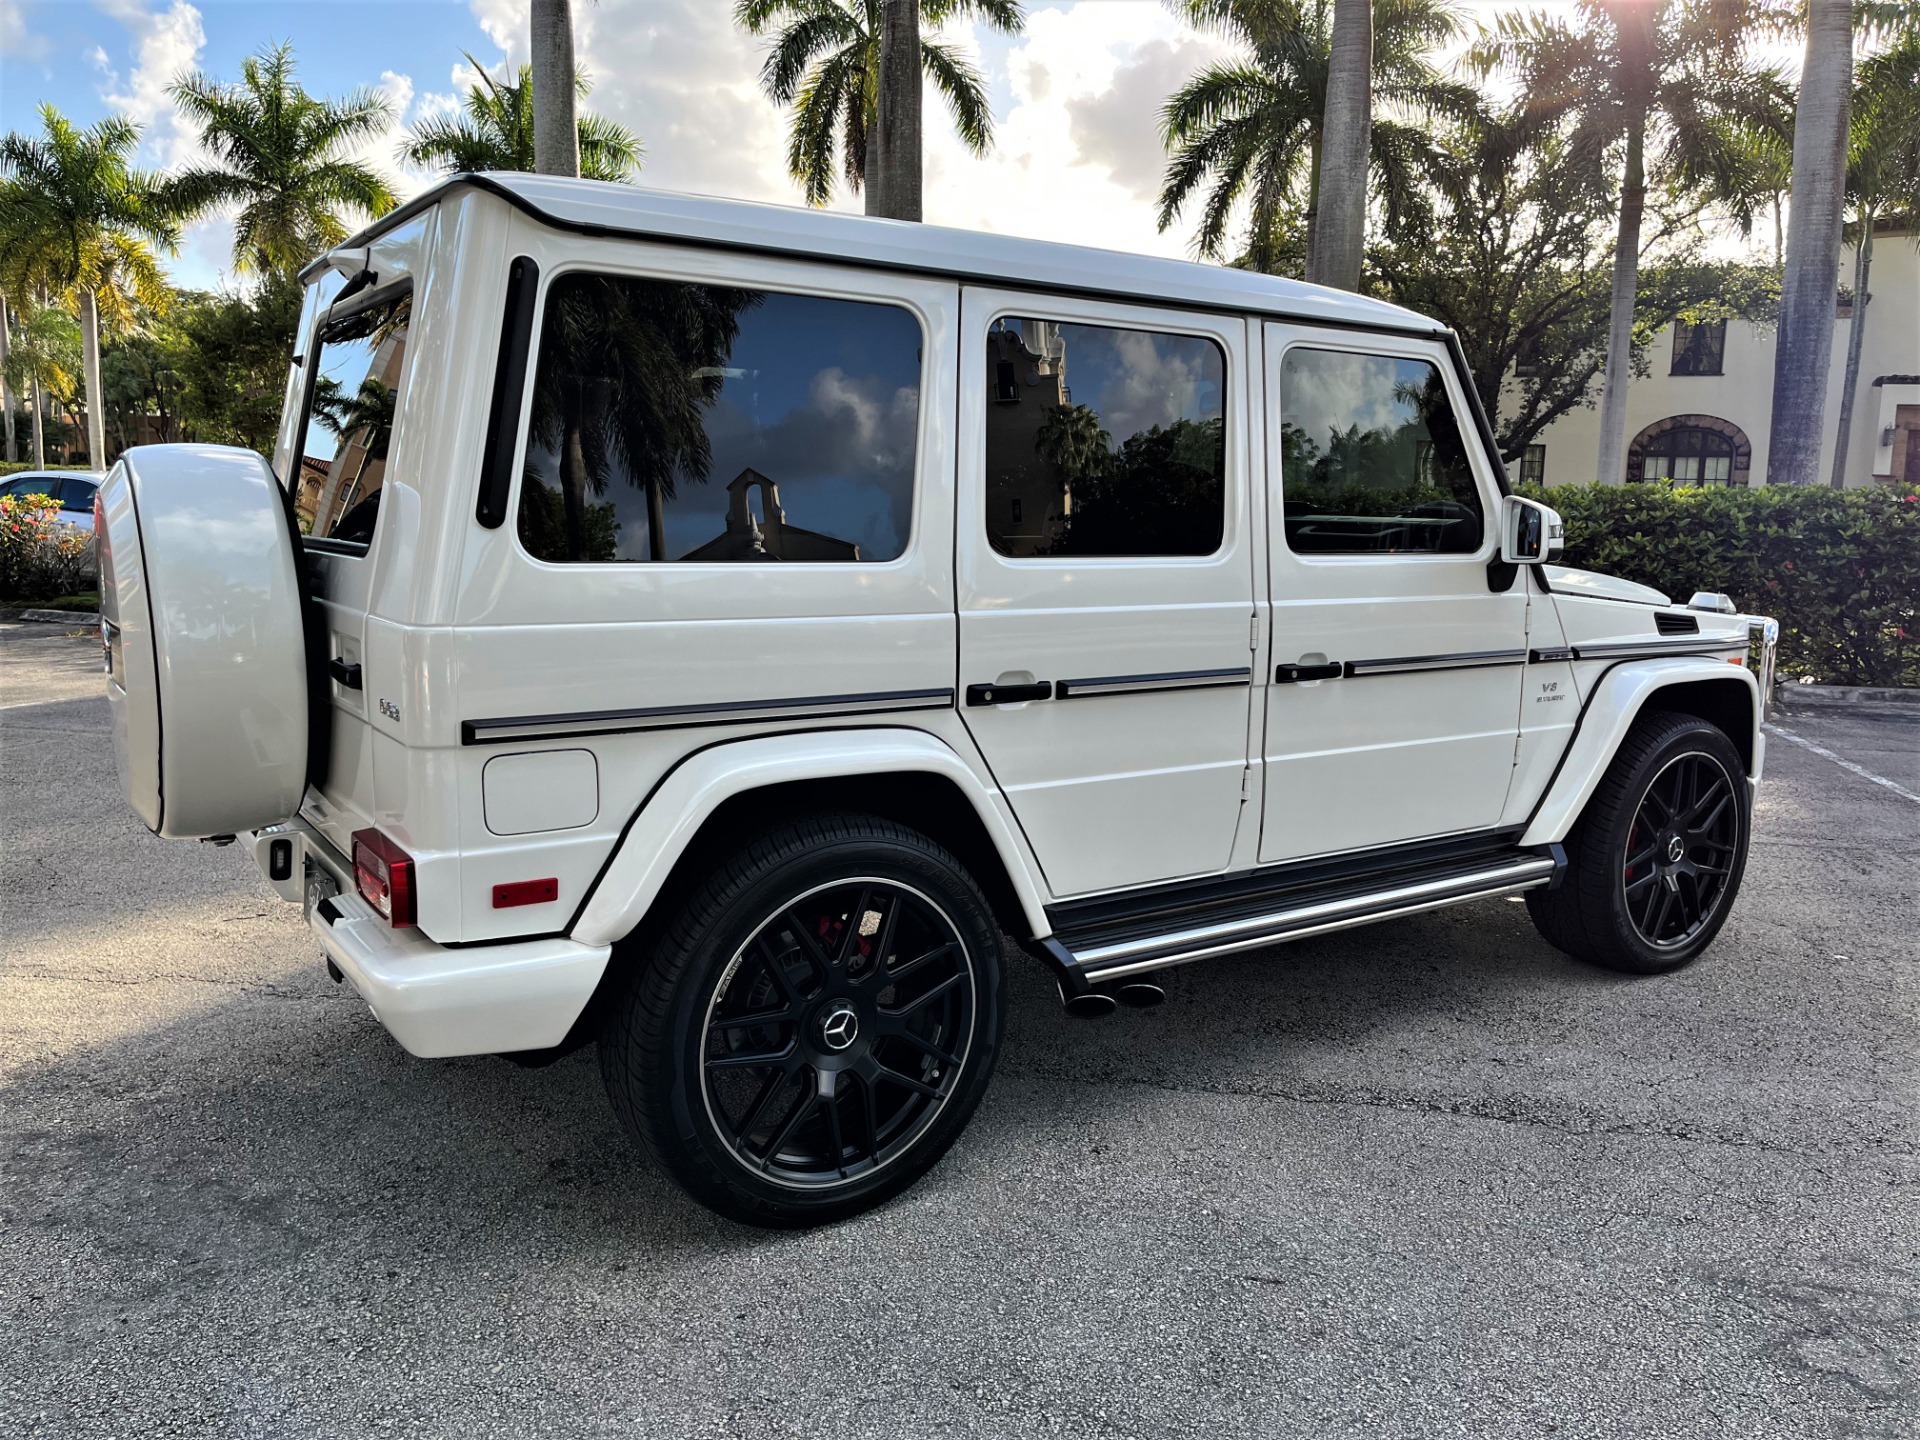 Used 2018 Mercedes-Benz G-Class AMG G 63 for sale $124,850 at The Gables Sports Cars in Miami FL 33146 4